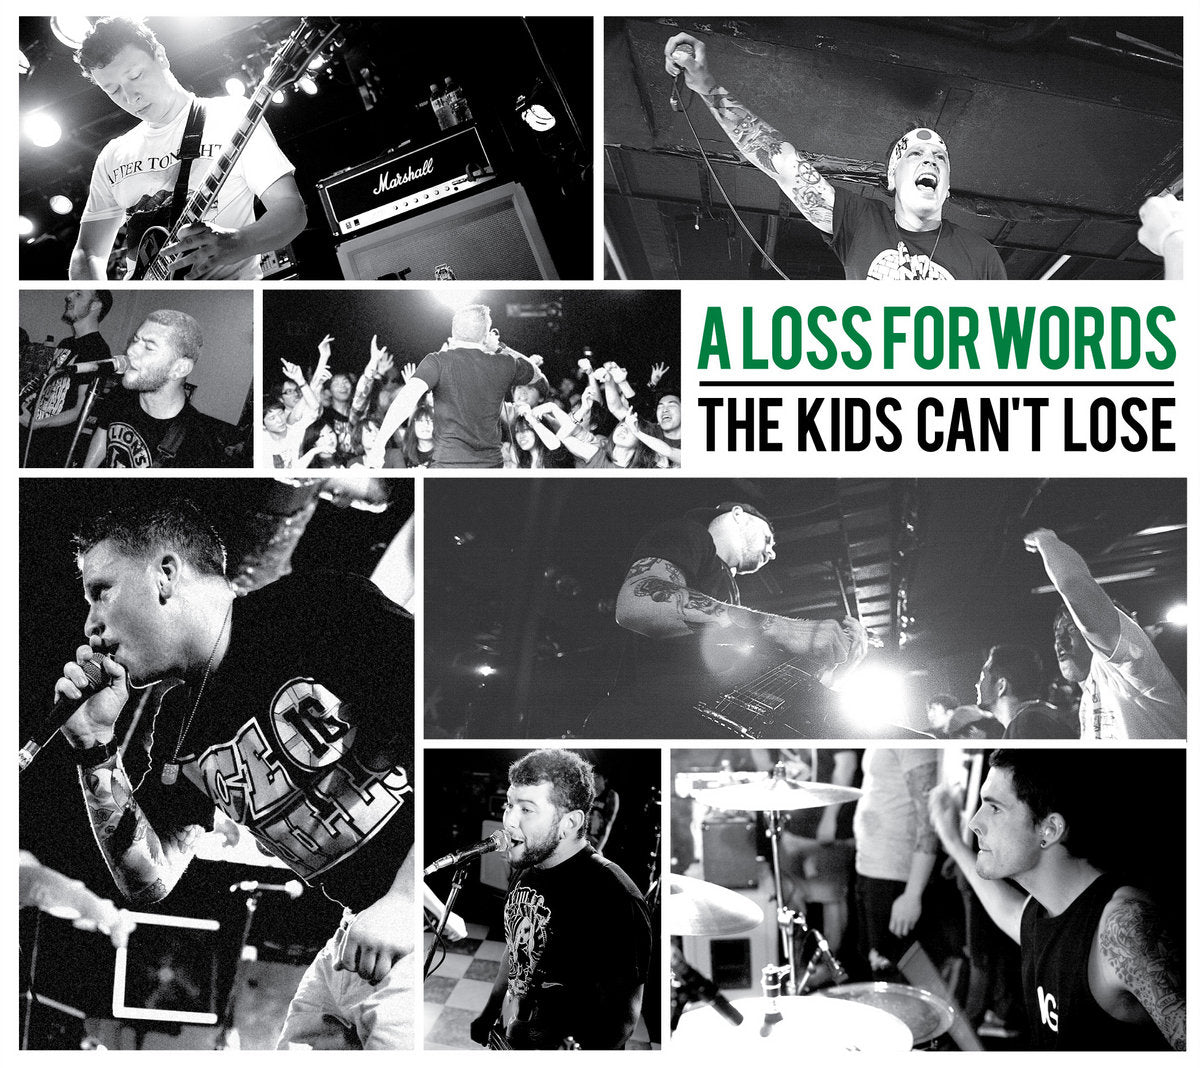 A Loss For Words "The Kids Can't Lose" 5 Year Anniversary Edition CD